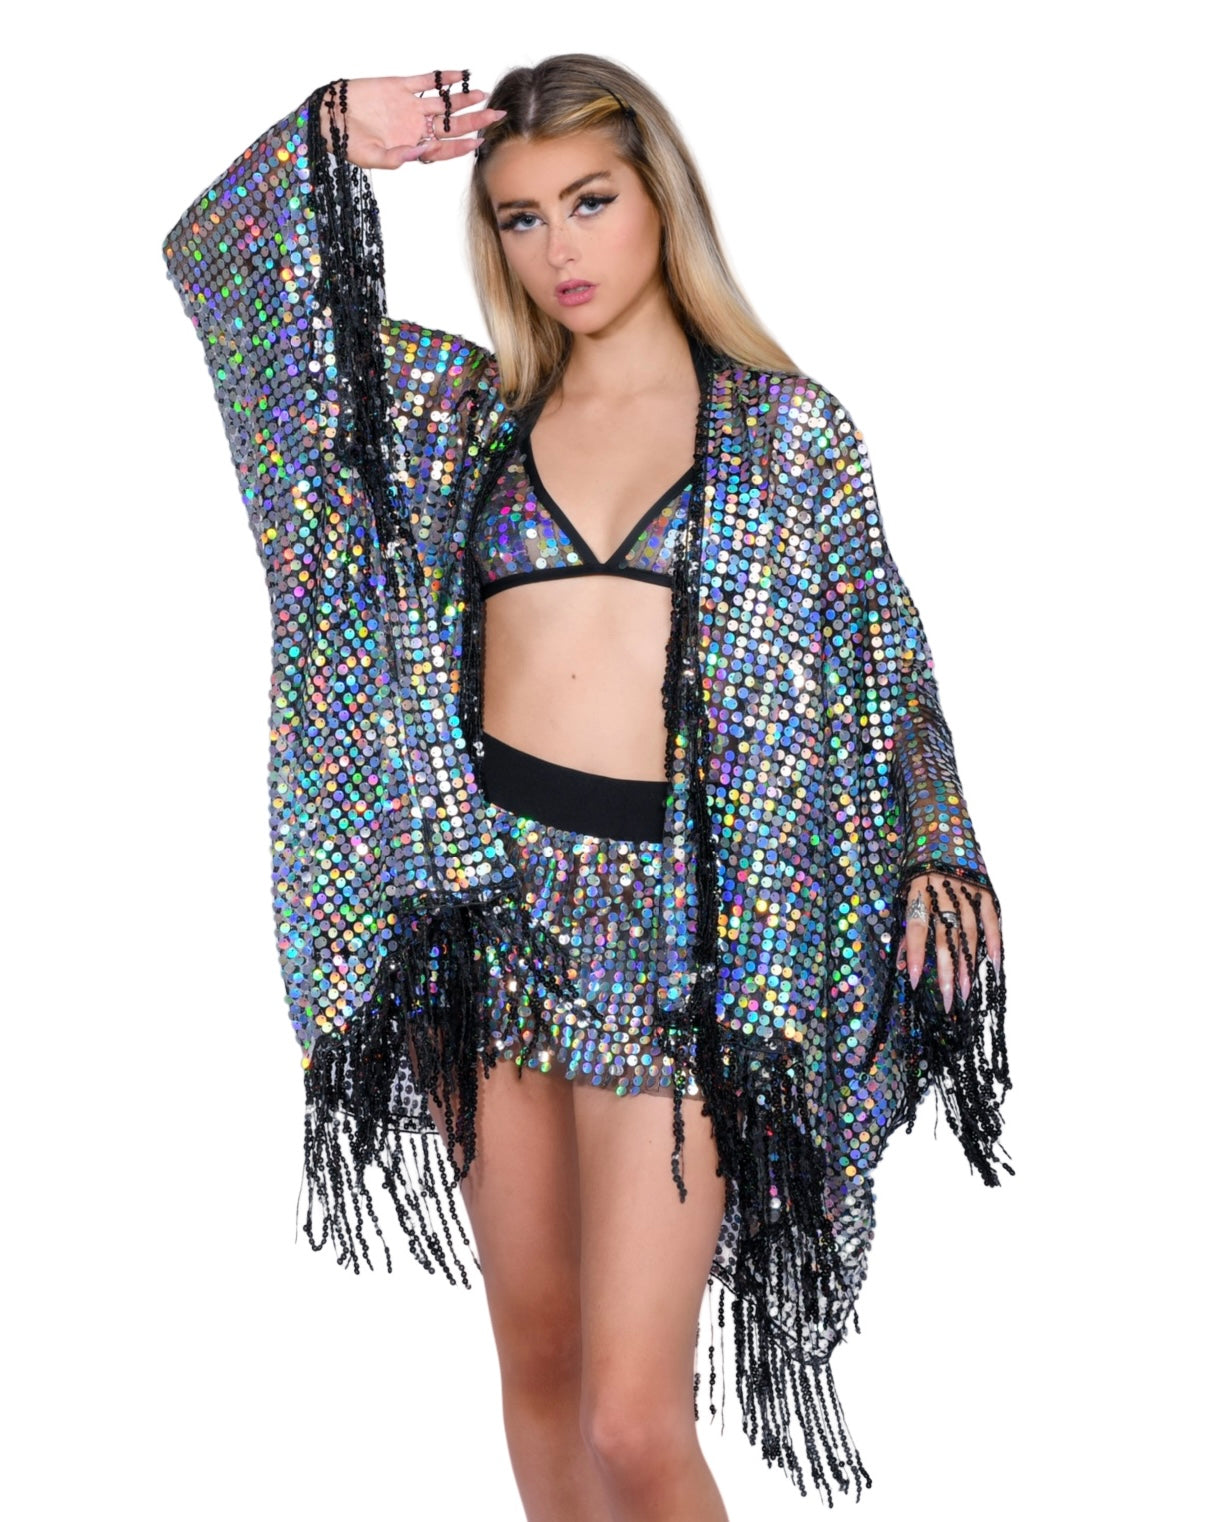 FULL OUTFIT- Hologram Rave clothes,rave outfits,edc outfits,rave